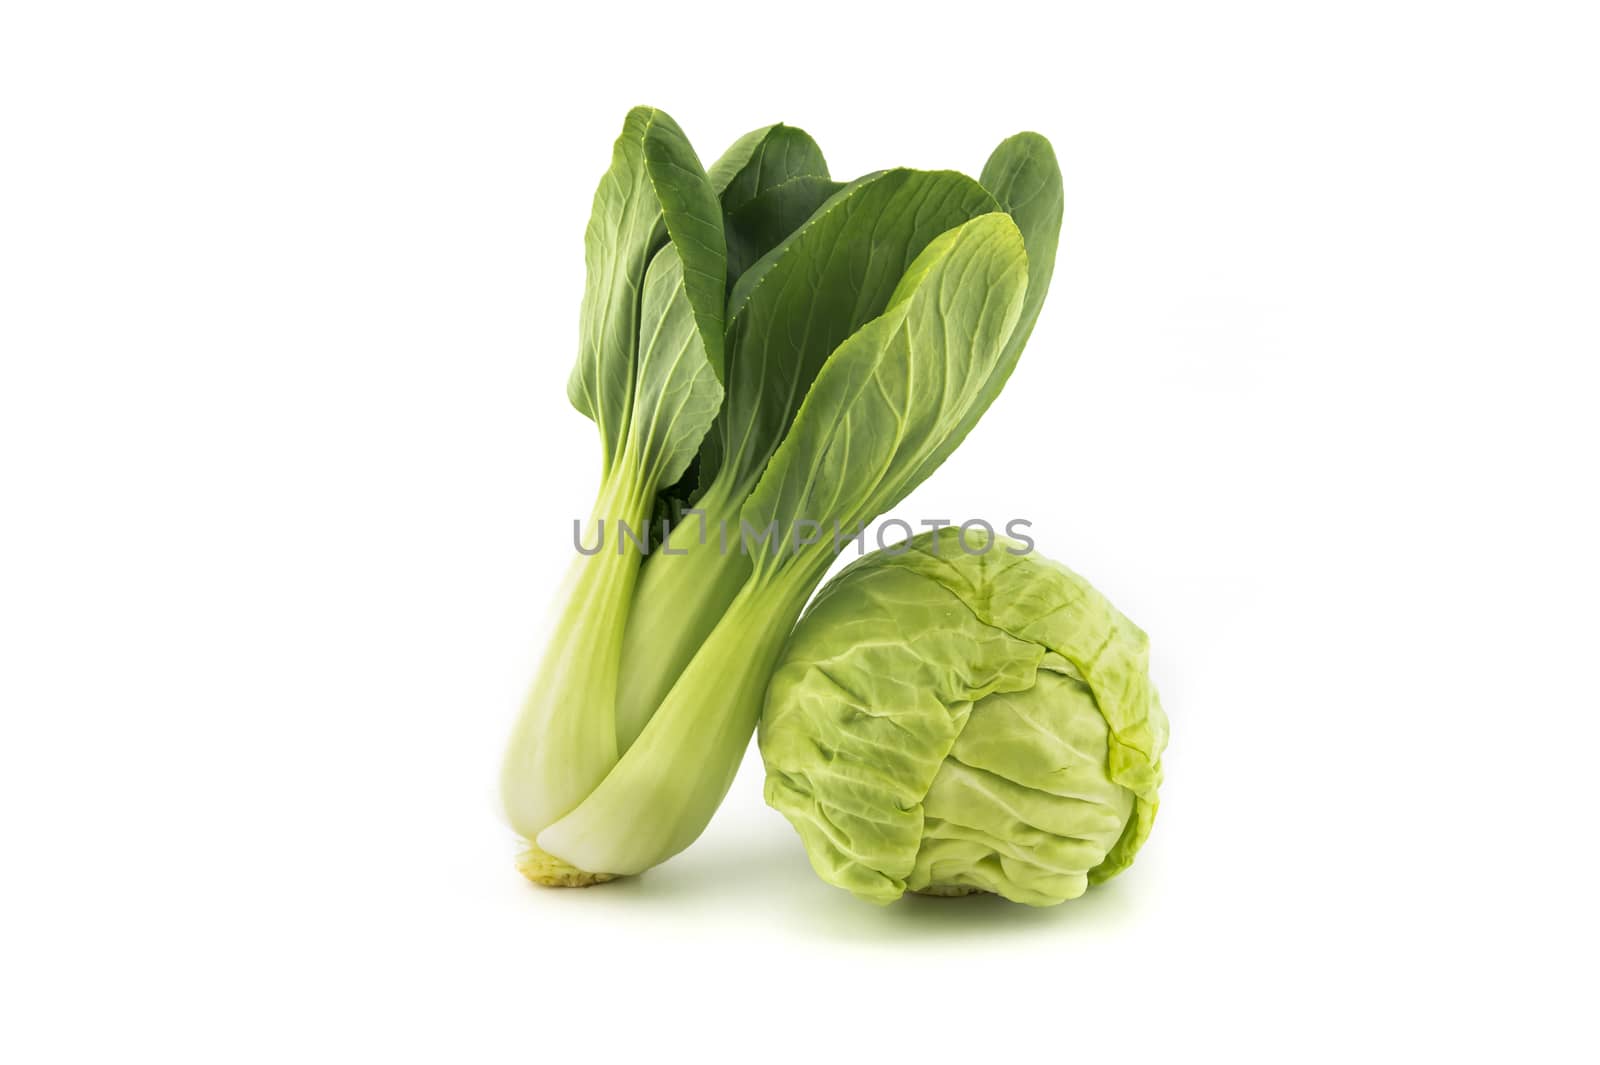 Pak choi cabbage or chinese cabbage by NetPix